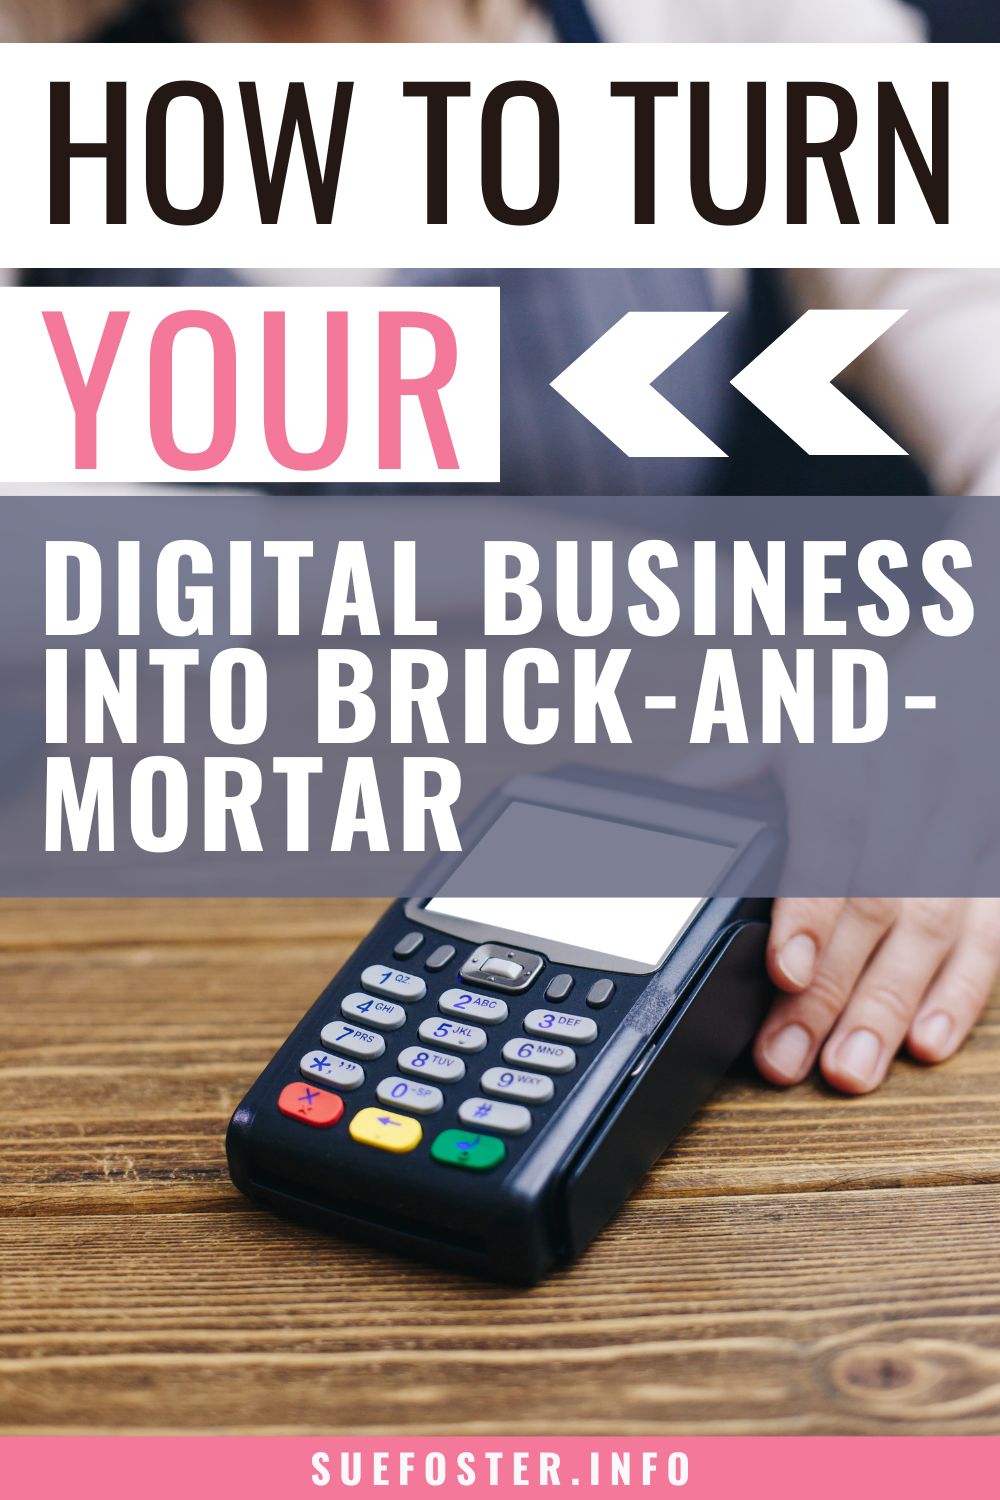 Transitioning from digital to brick-and-mortar is a big step for any business. However, following these steps can ensure a smooth transition and set your business up for success.